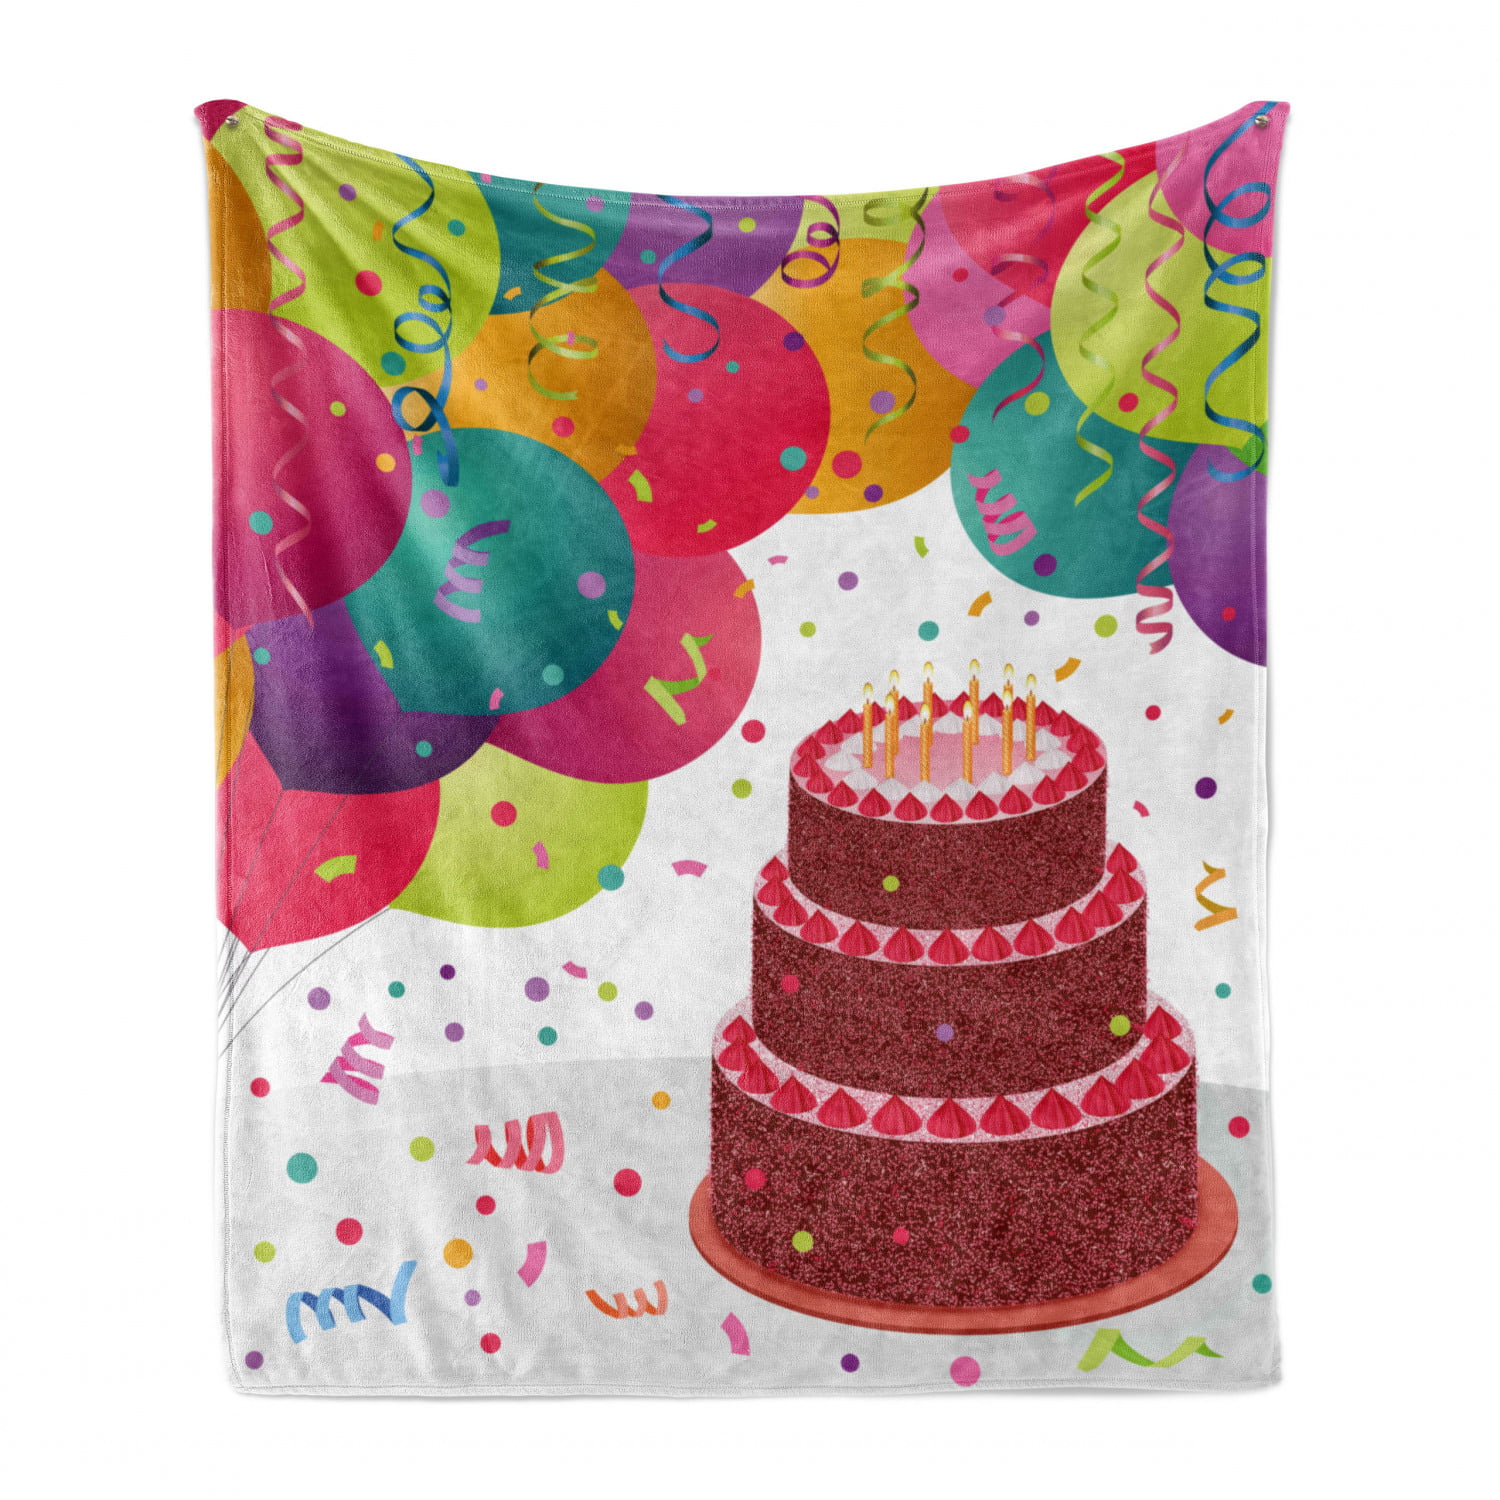 50 x 70 Strawberry Triplex Cake with Candles Ribbons Balloons Celebration Theme Cozy Plush for Indoor and Outdoor Use Multicolor Ambesonne Birthday Soft Flannel Fleece Throw Blanket 